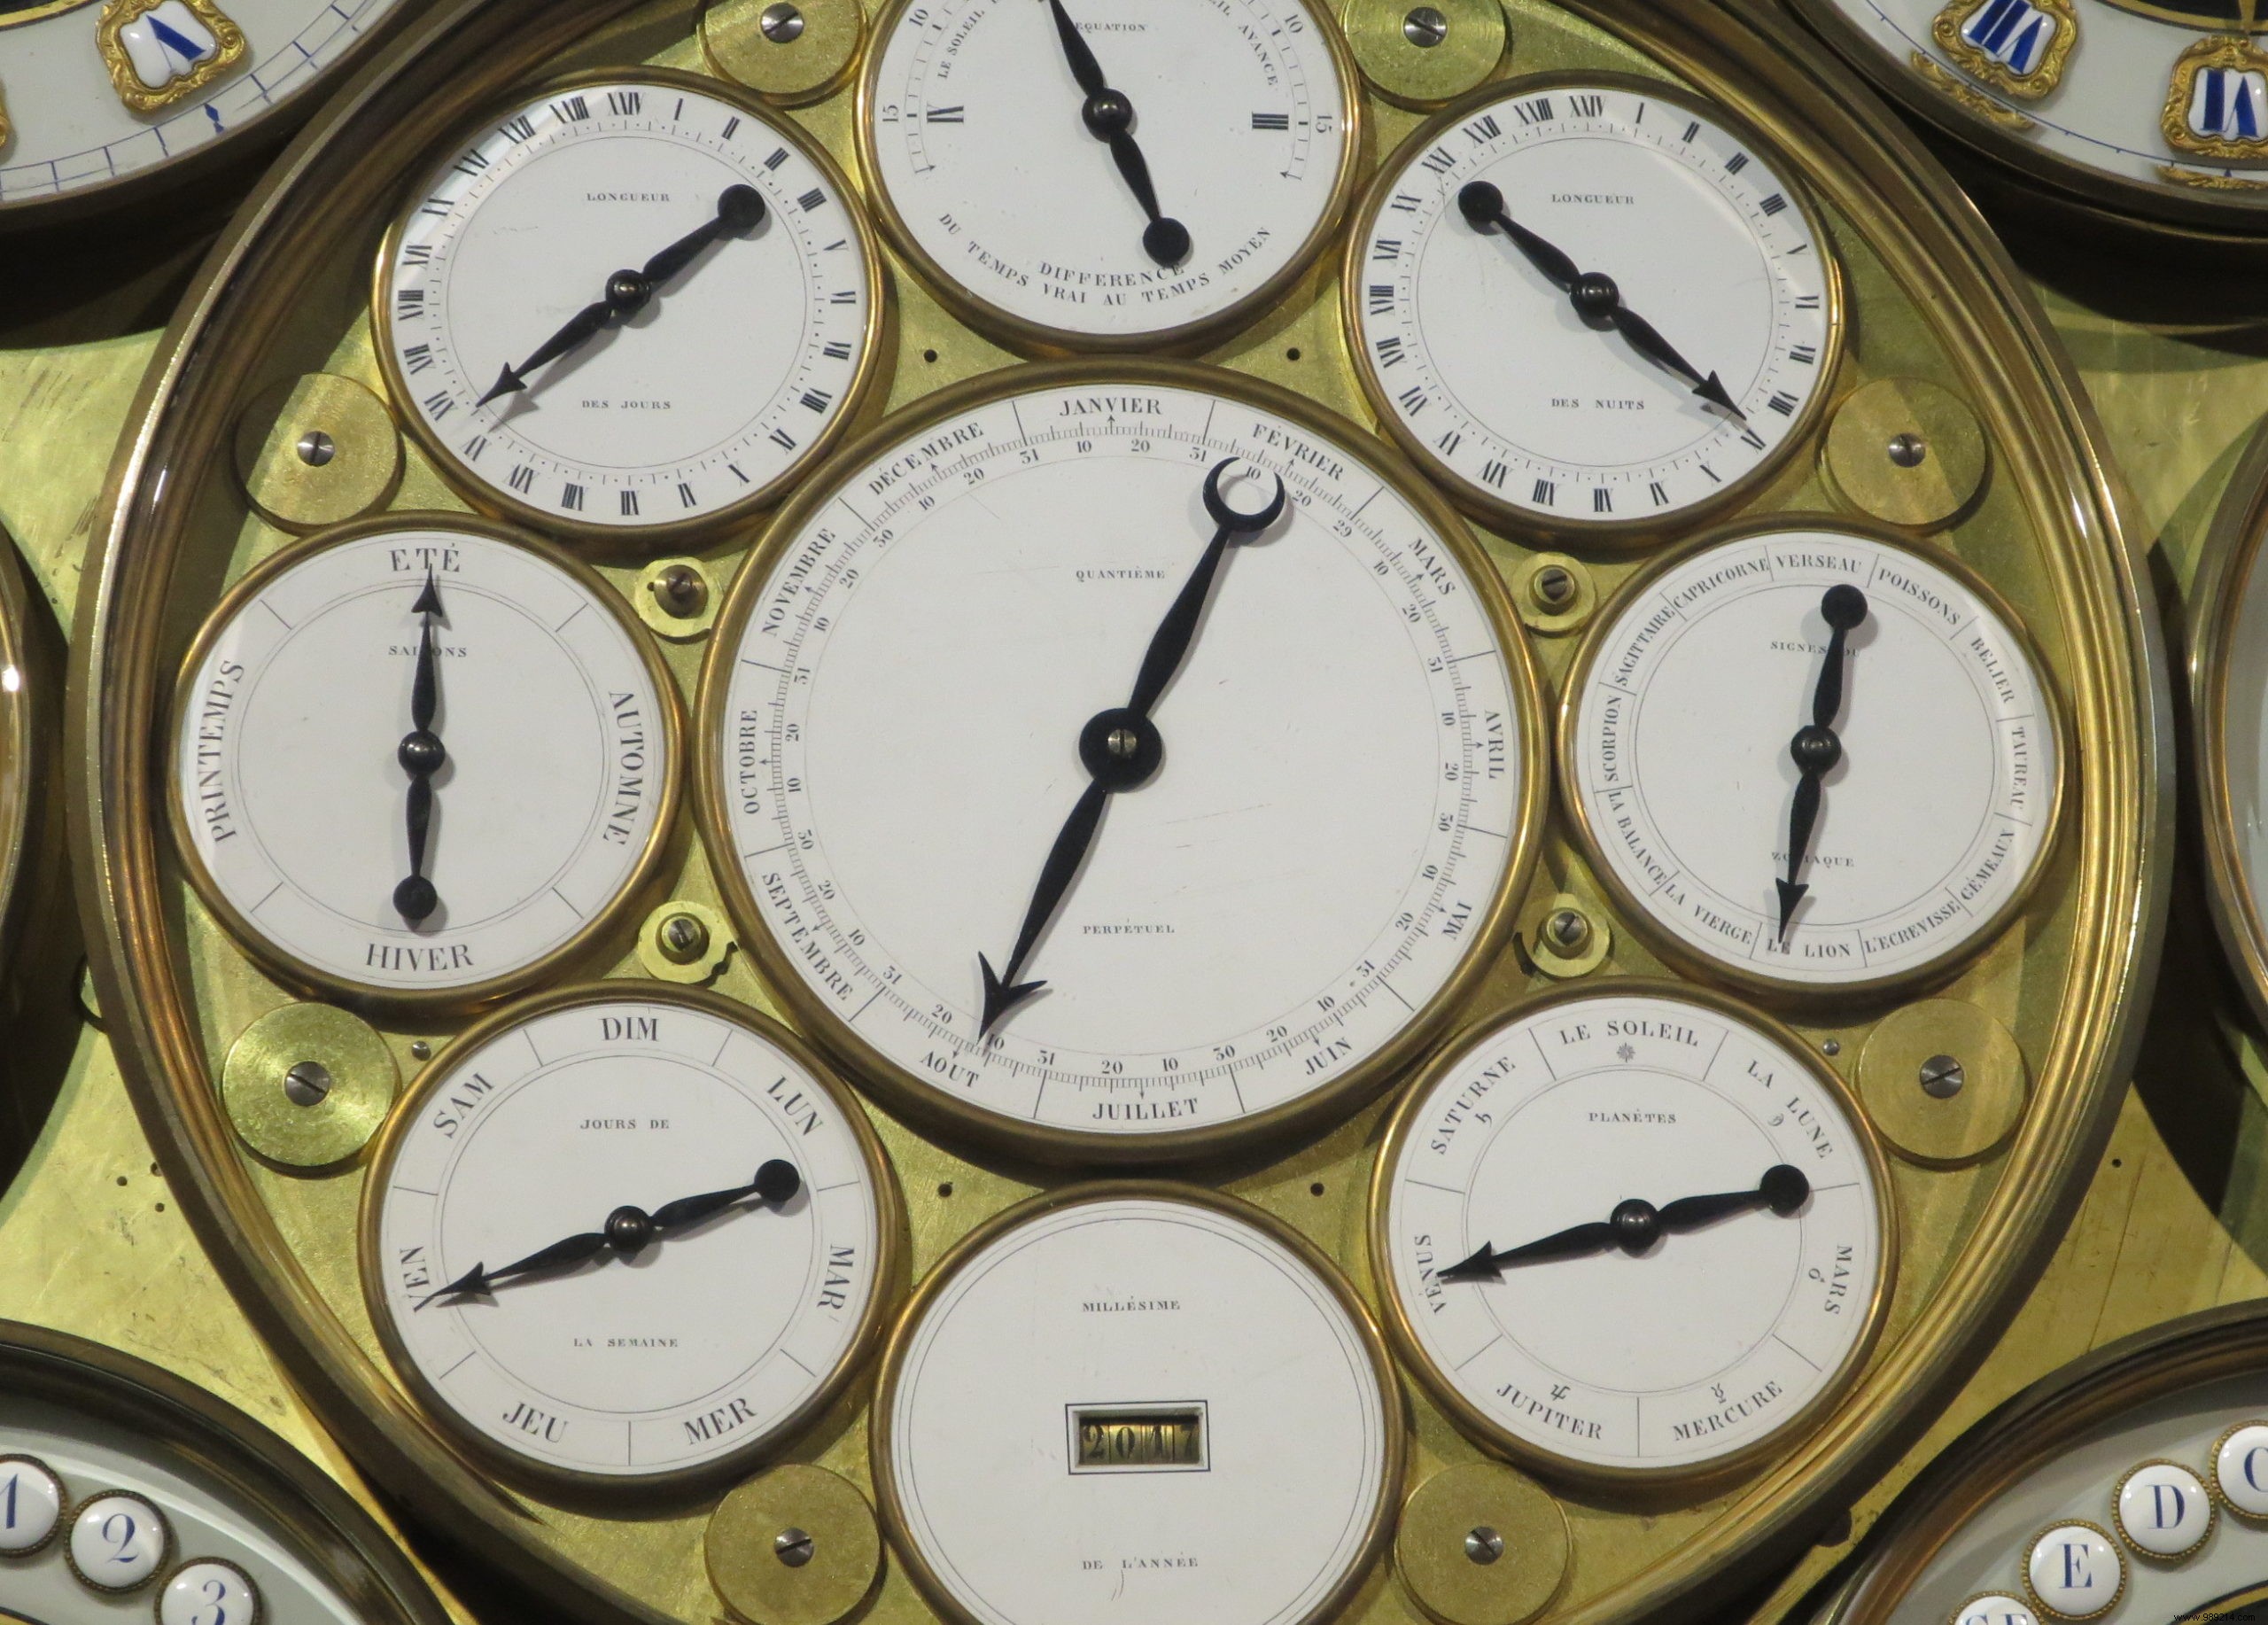 This incredible experiment proved the existence of the circadian clock in humans 